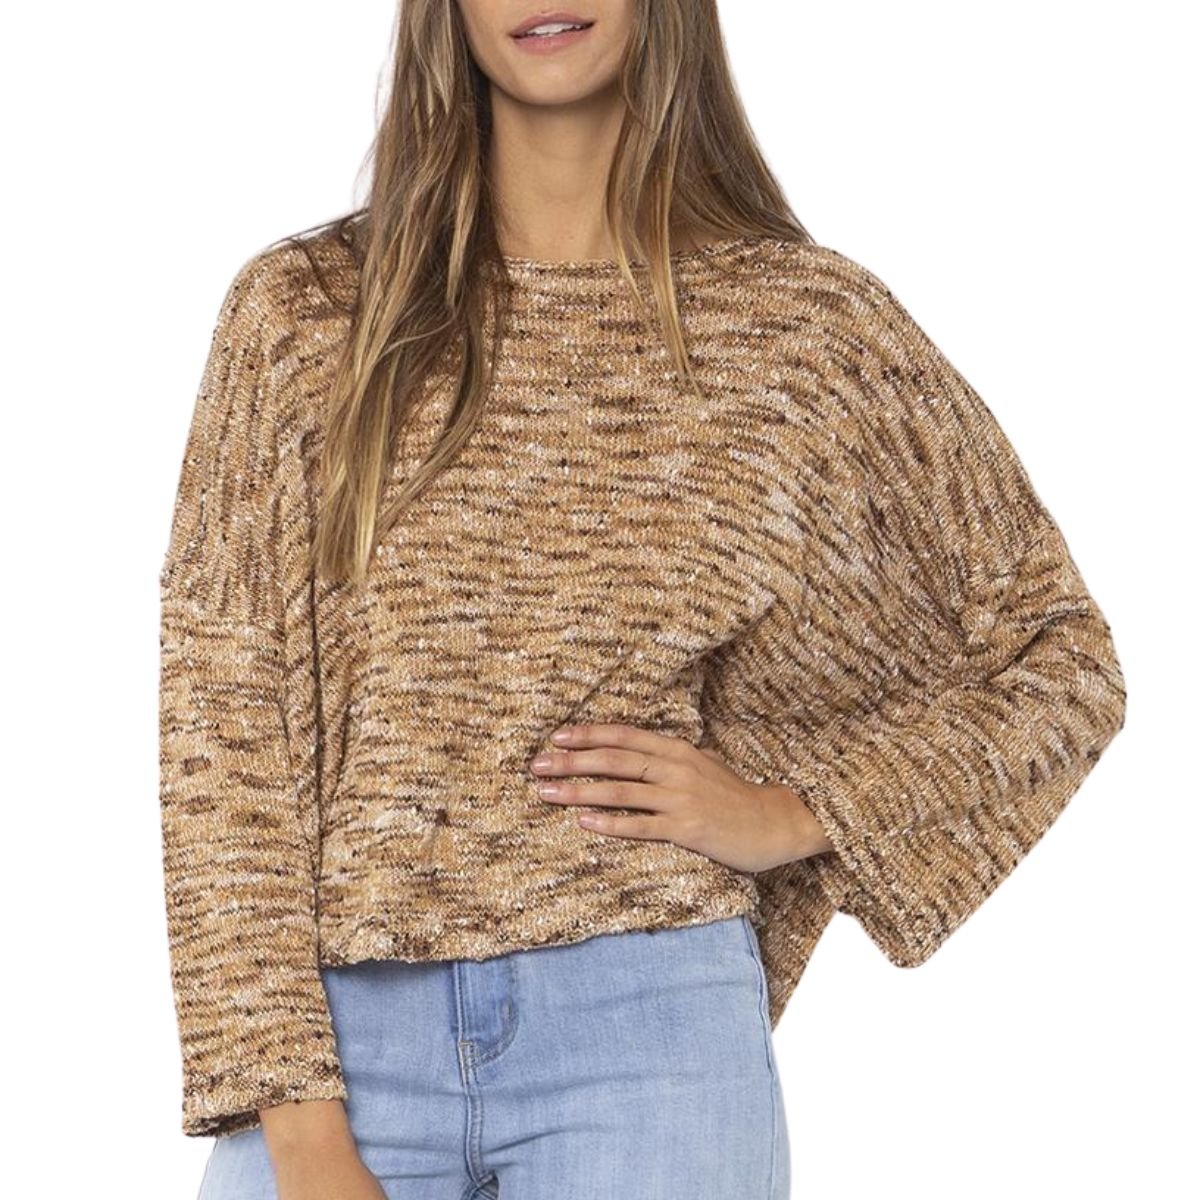 Sisstrevolution Blissed Out L/S Knit Sweater in Sunkissed Sands - BoardCo